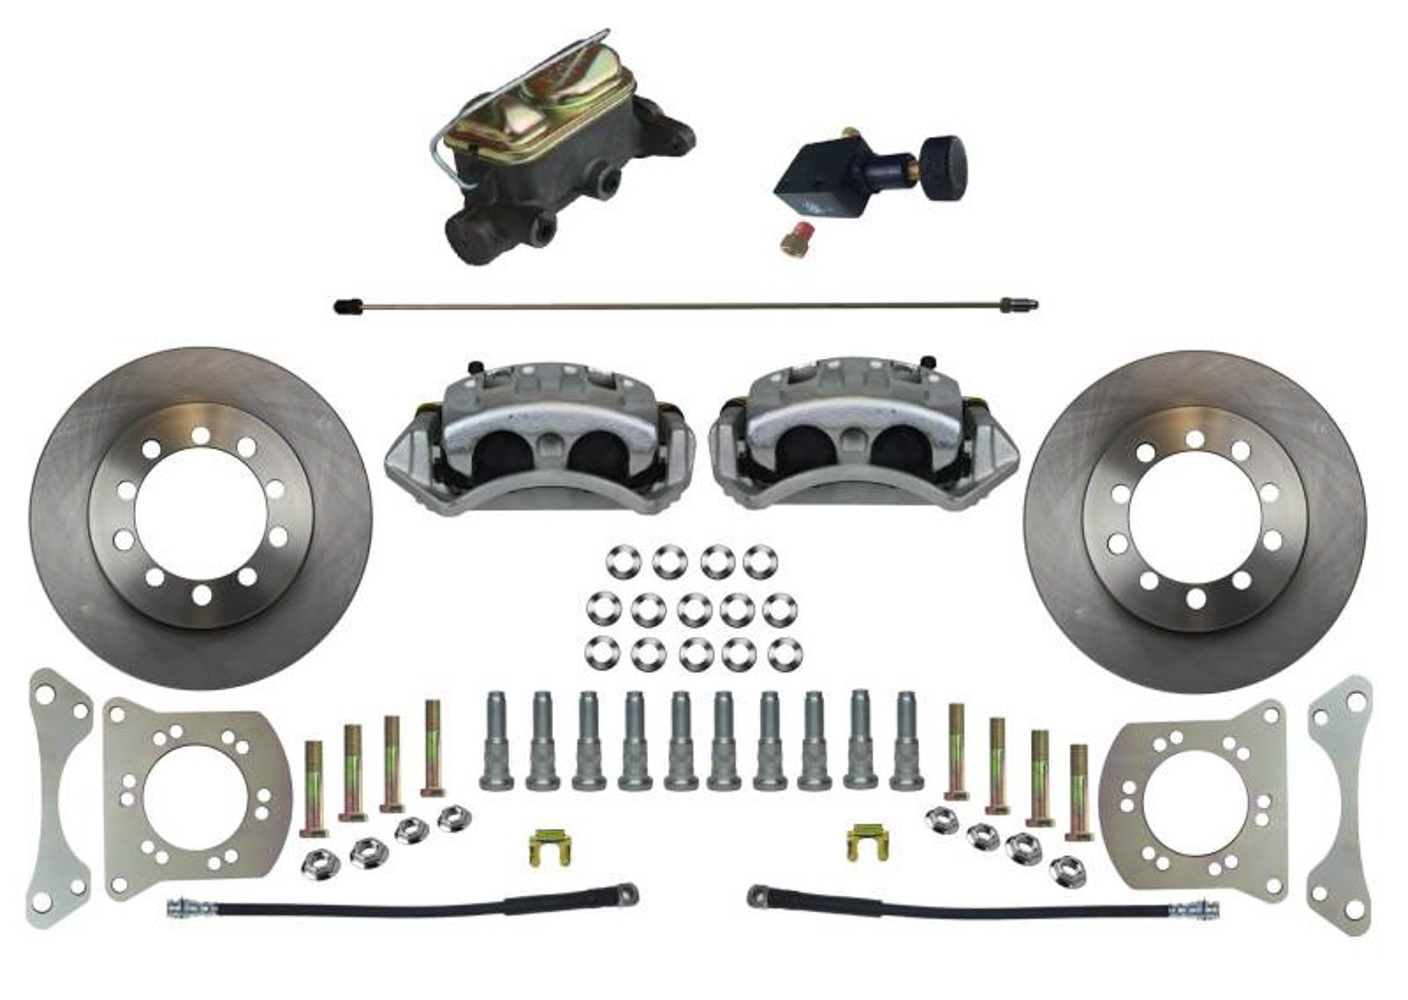 Leed Brakes FC5001-405 - Brake System, Disc Conversion, Front, 2 Piston Caliper, 12 in Solid Rotors, Master Cylinder, Iron, Zinc Plated, Ford Fullsize SUV 1966-75, Kit